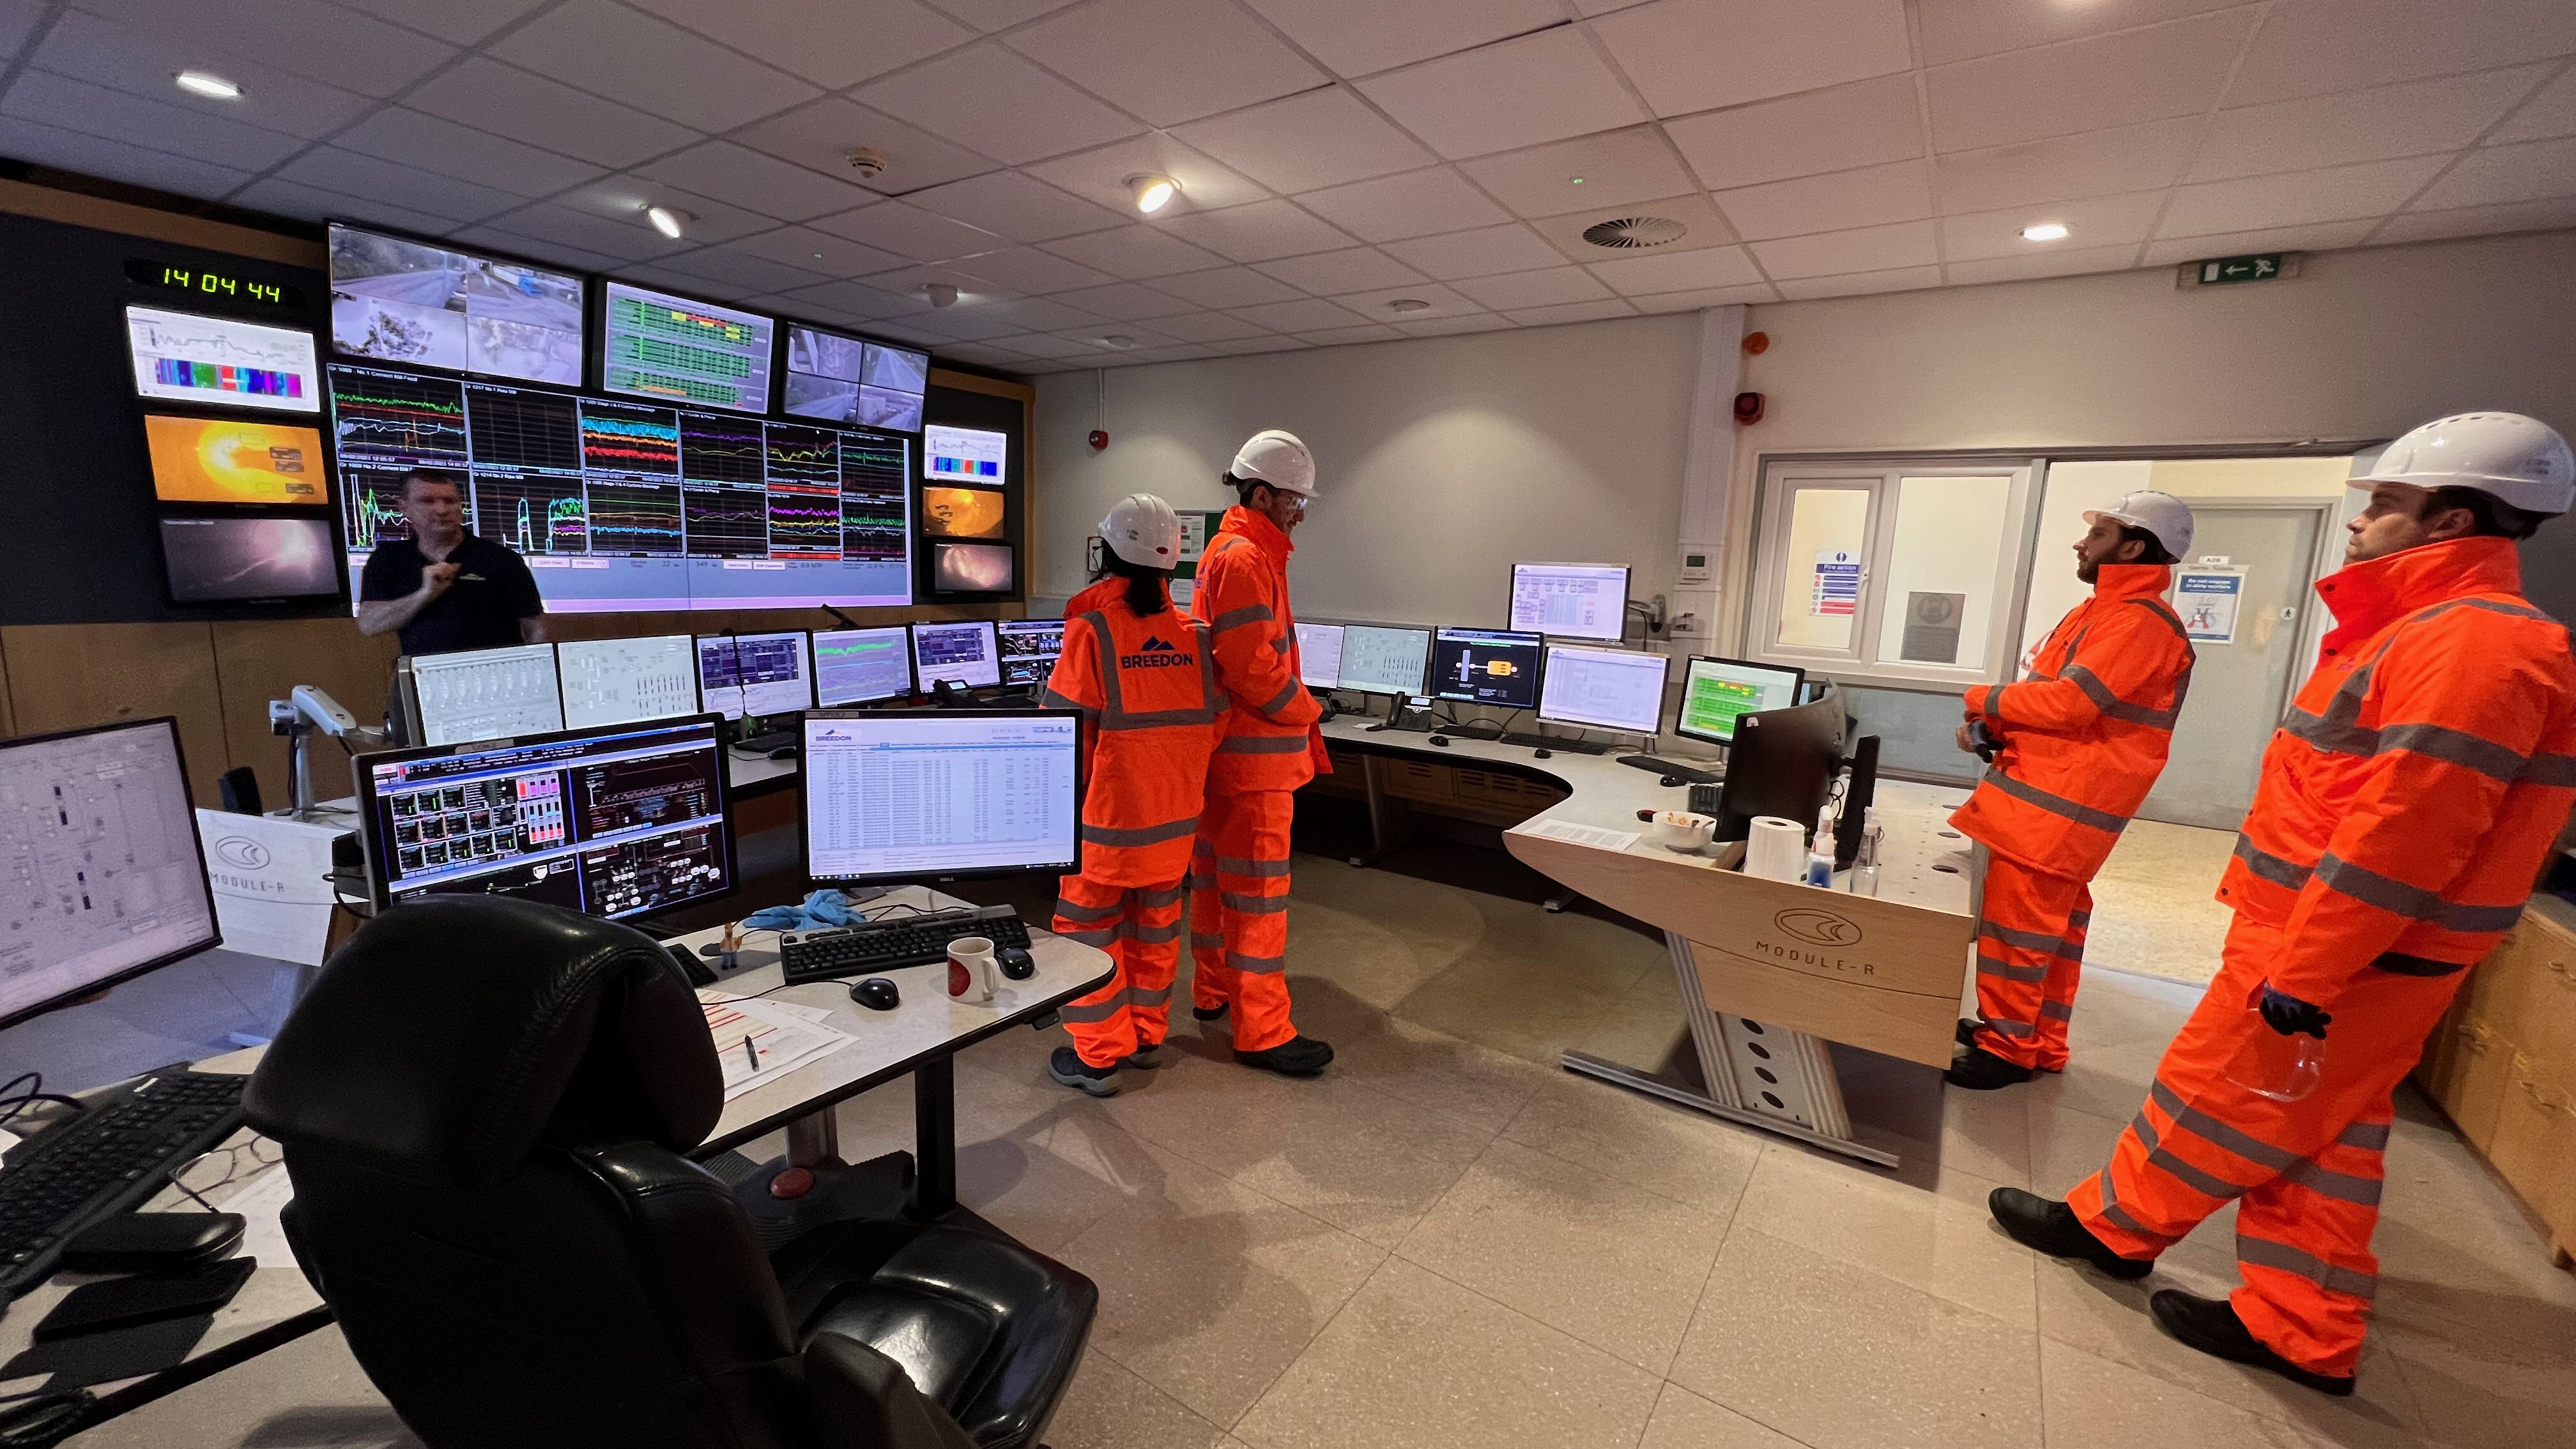 Workmen in hard hats standing in office with a large bank of data monitor screens